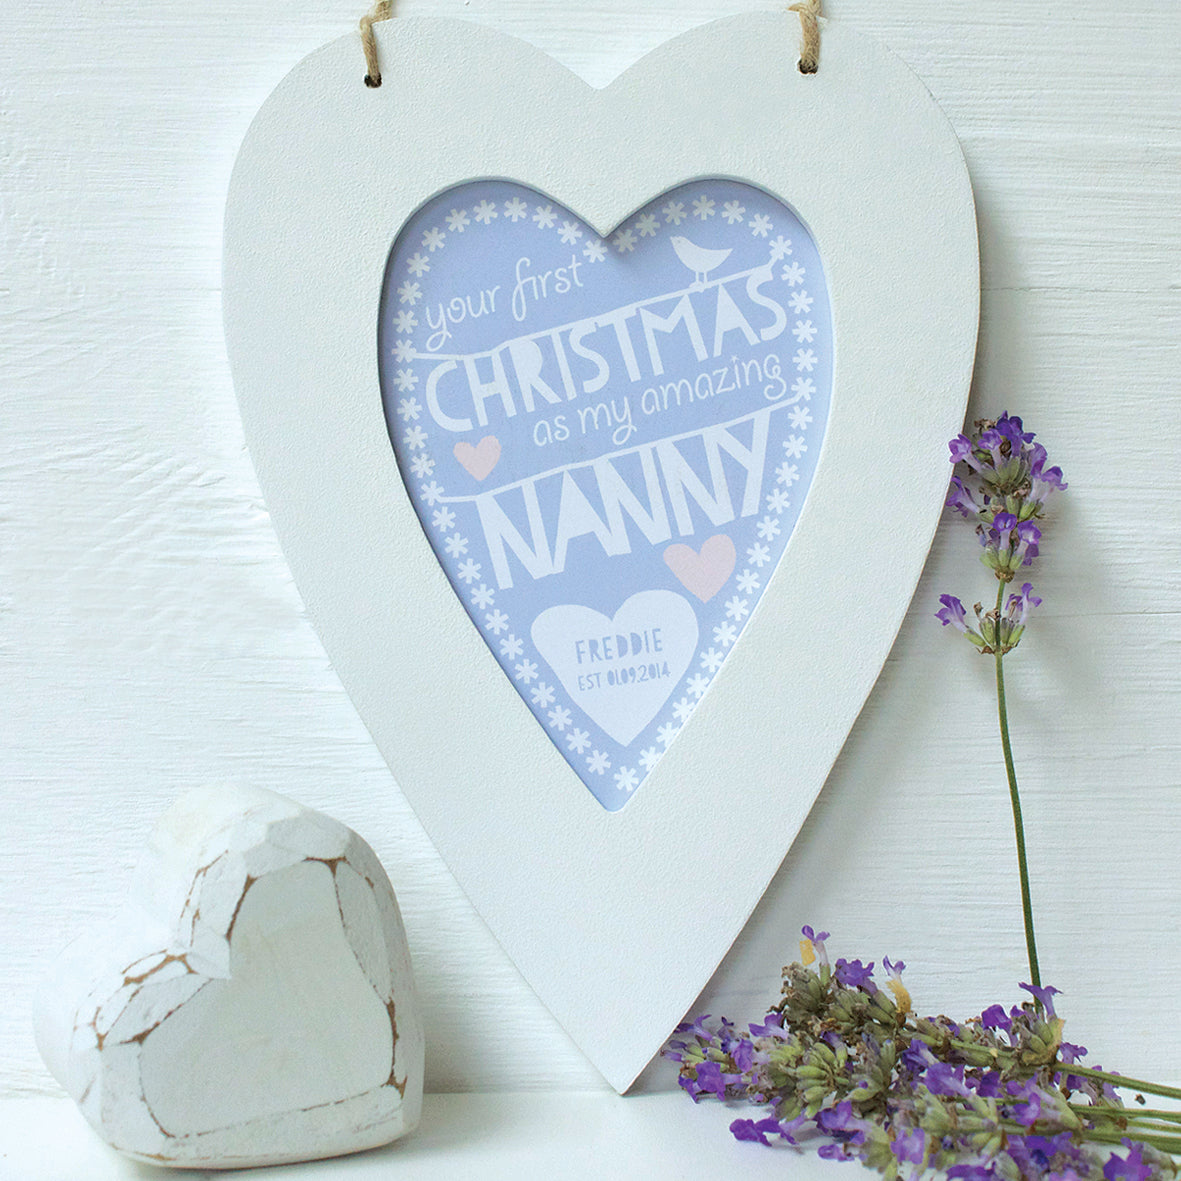 personalised first christmas nanny print, white heart